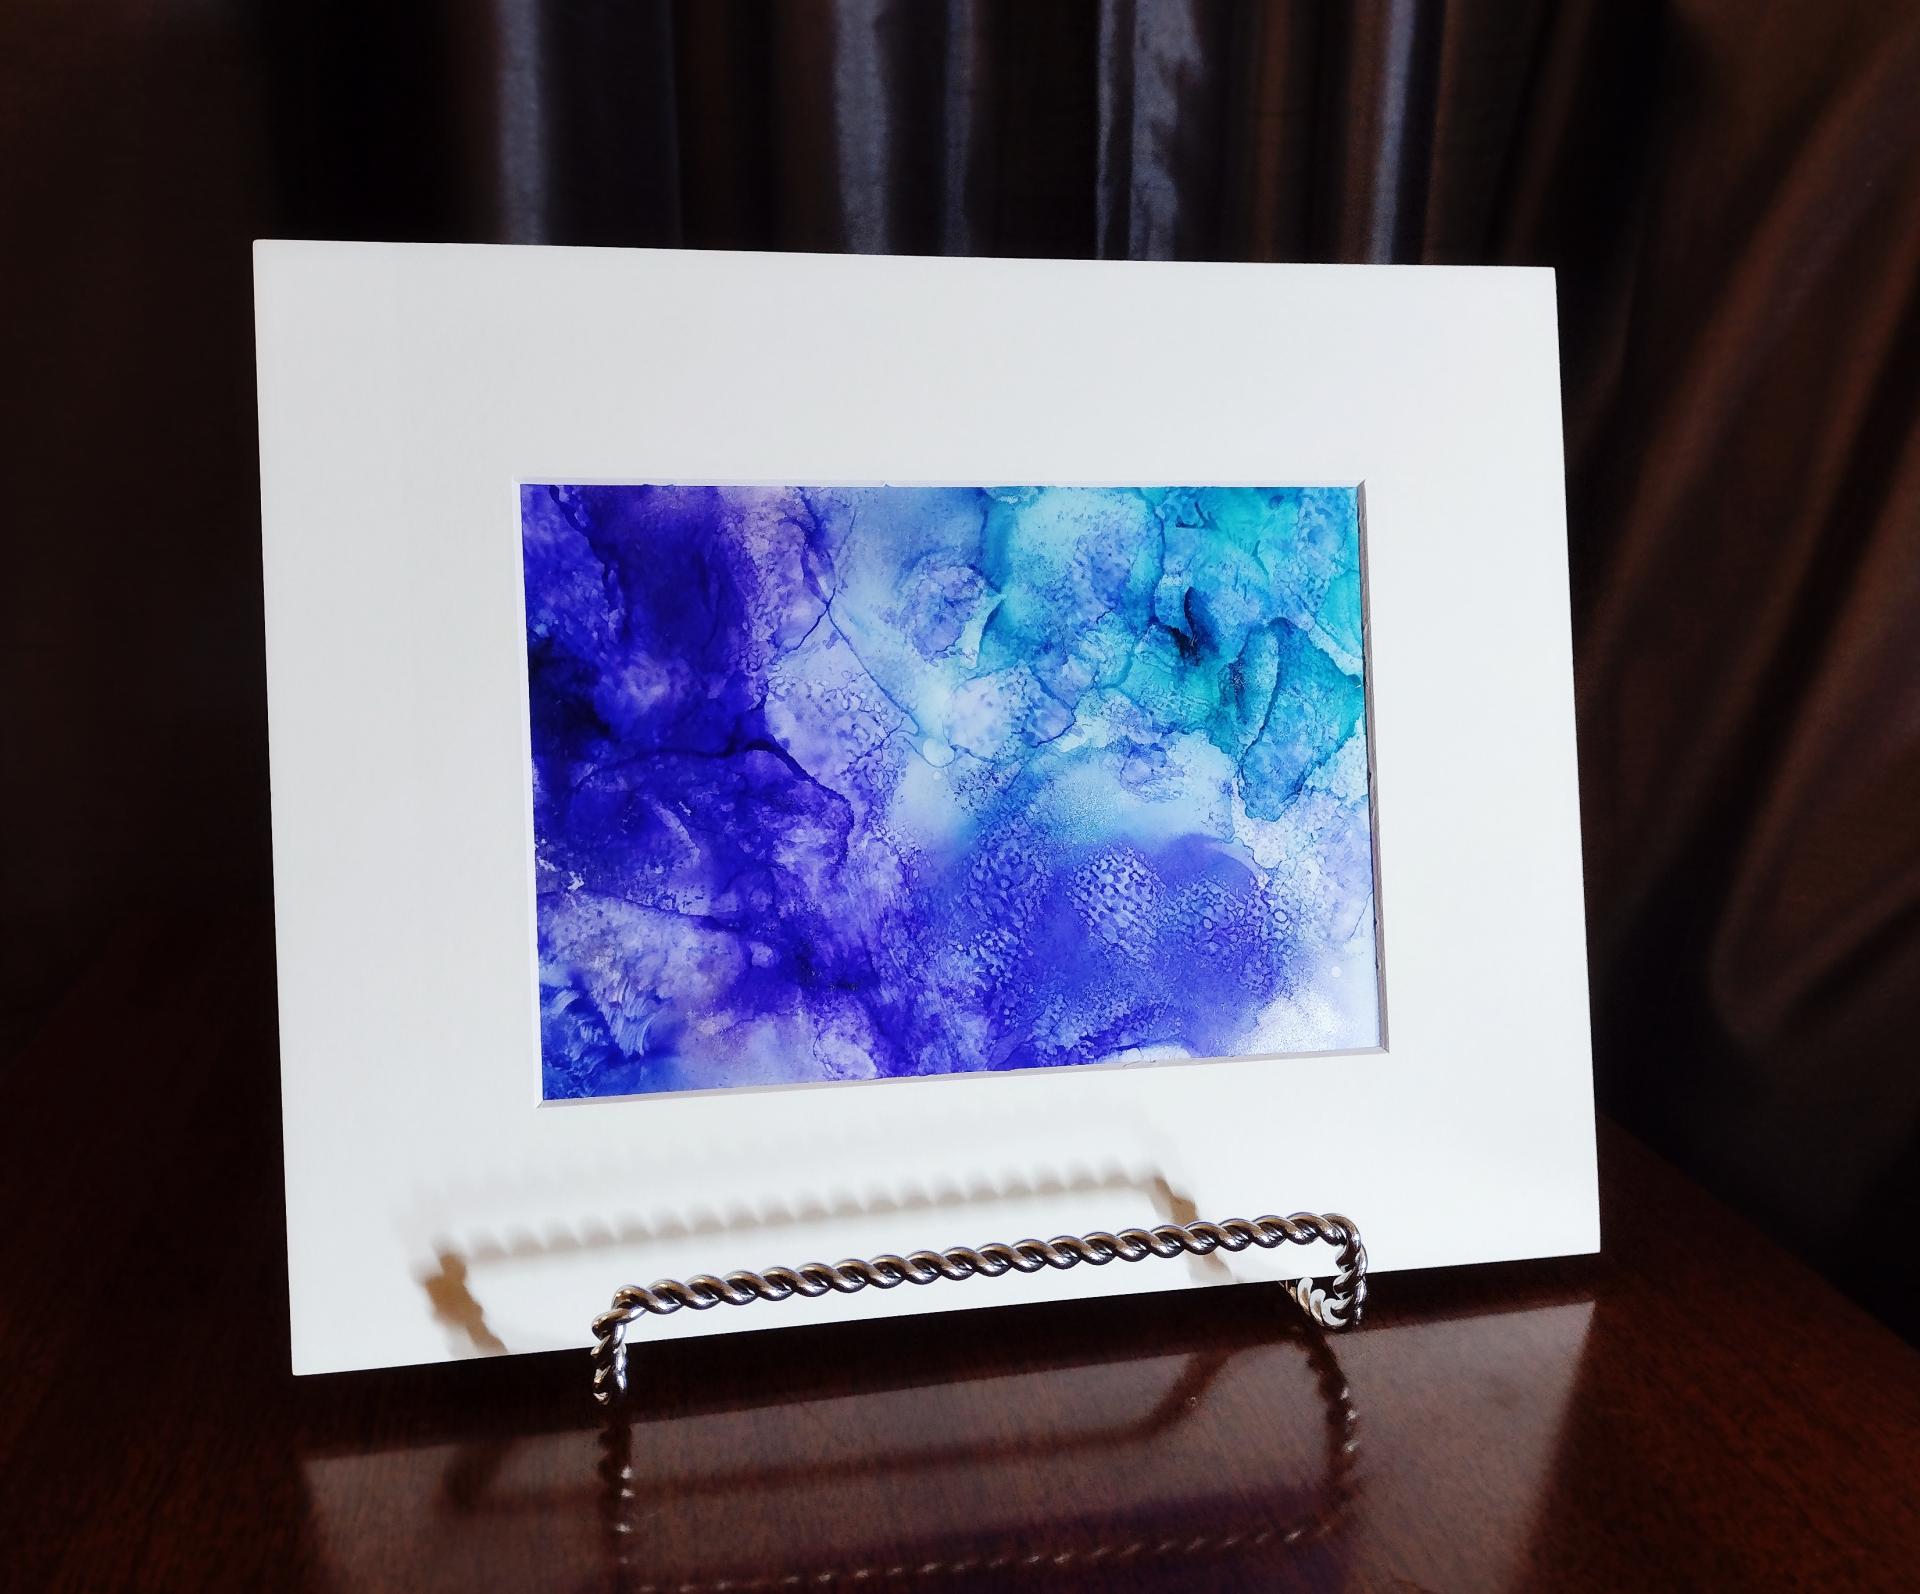 Alcohol Ink Painting Grouping, Set of 2, Purple and Blue Pearlized Fluid Art